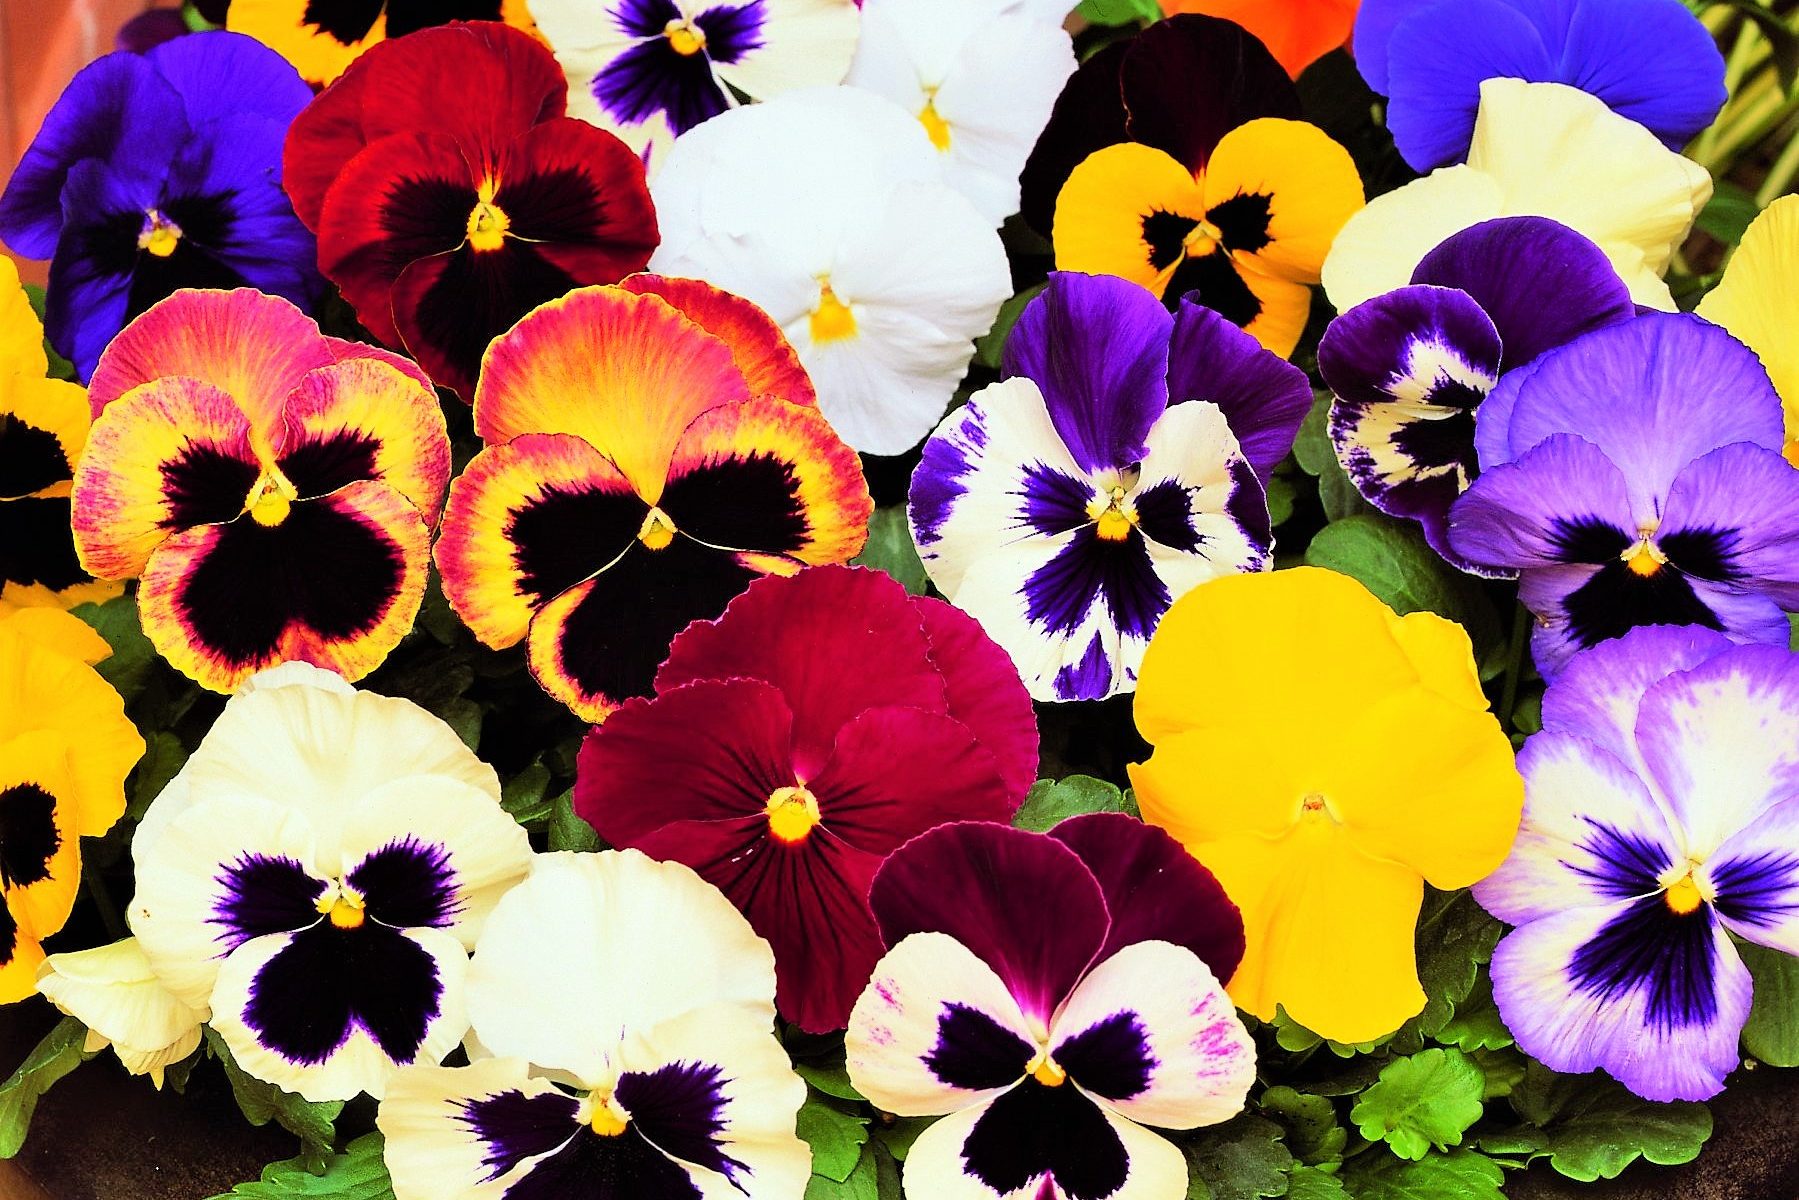 pansy mix in a bowl